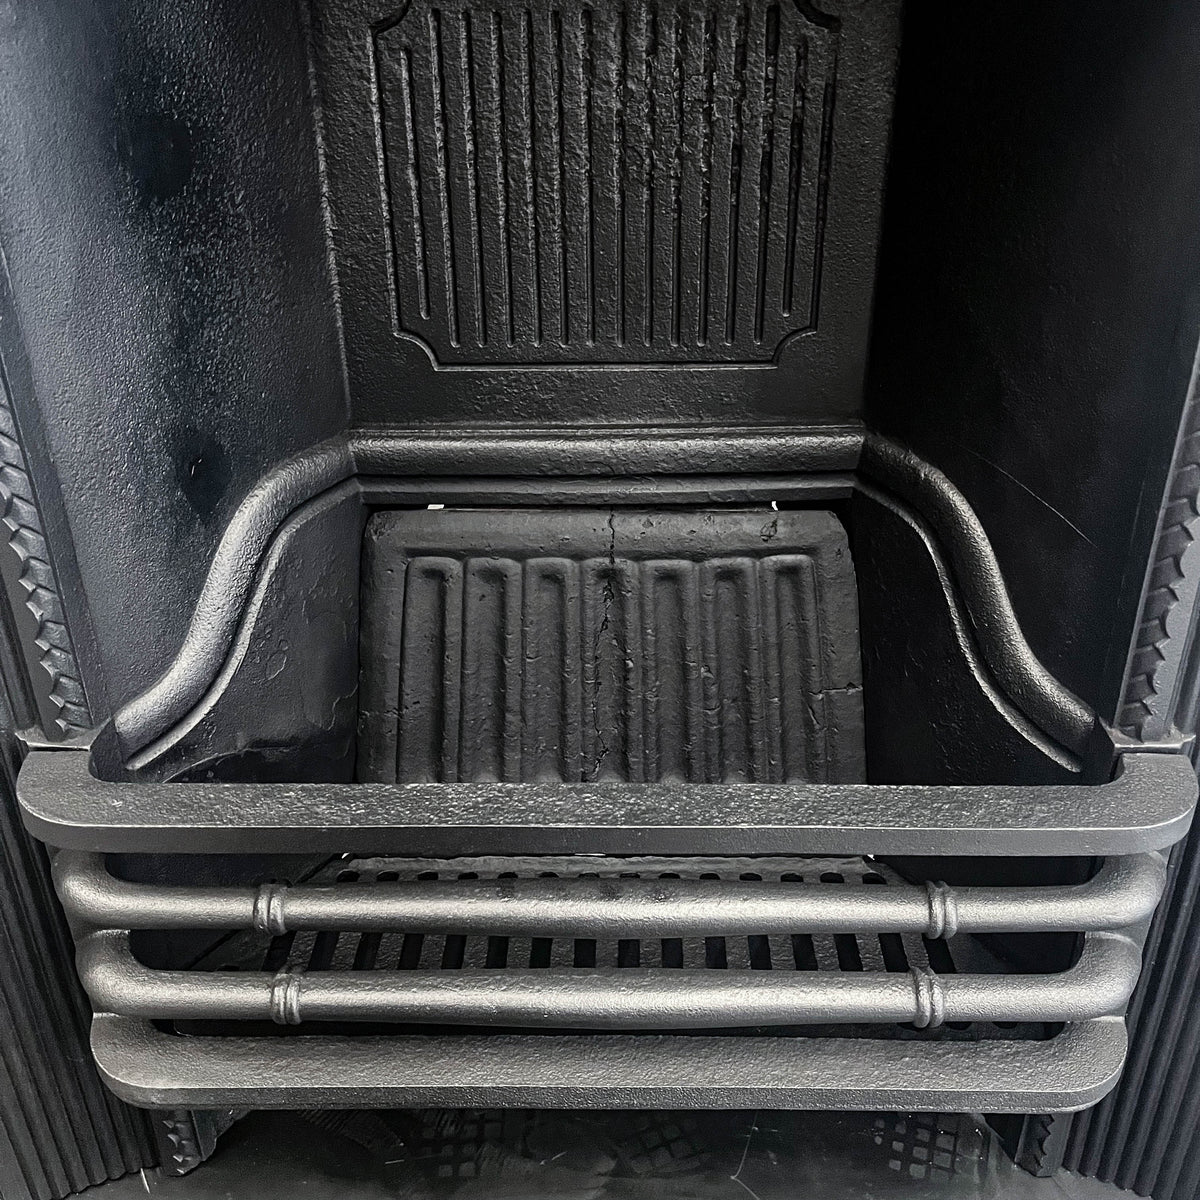 Cast Iron Antique Victorian Combination Fireplace | The Architectural Forum